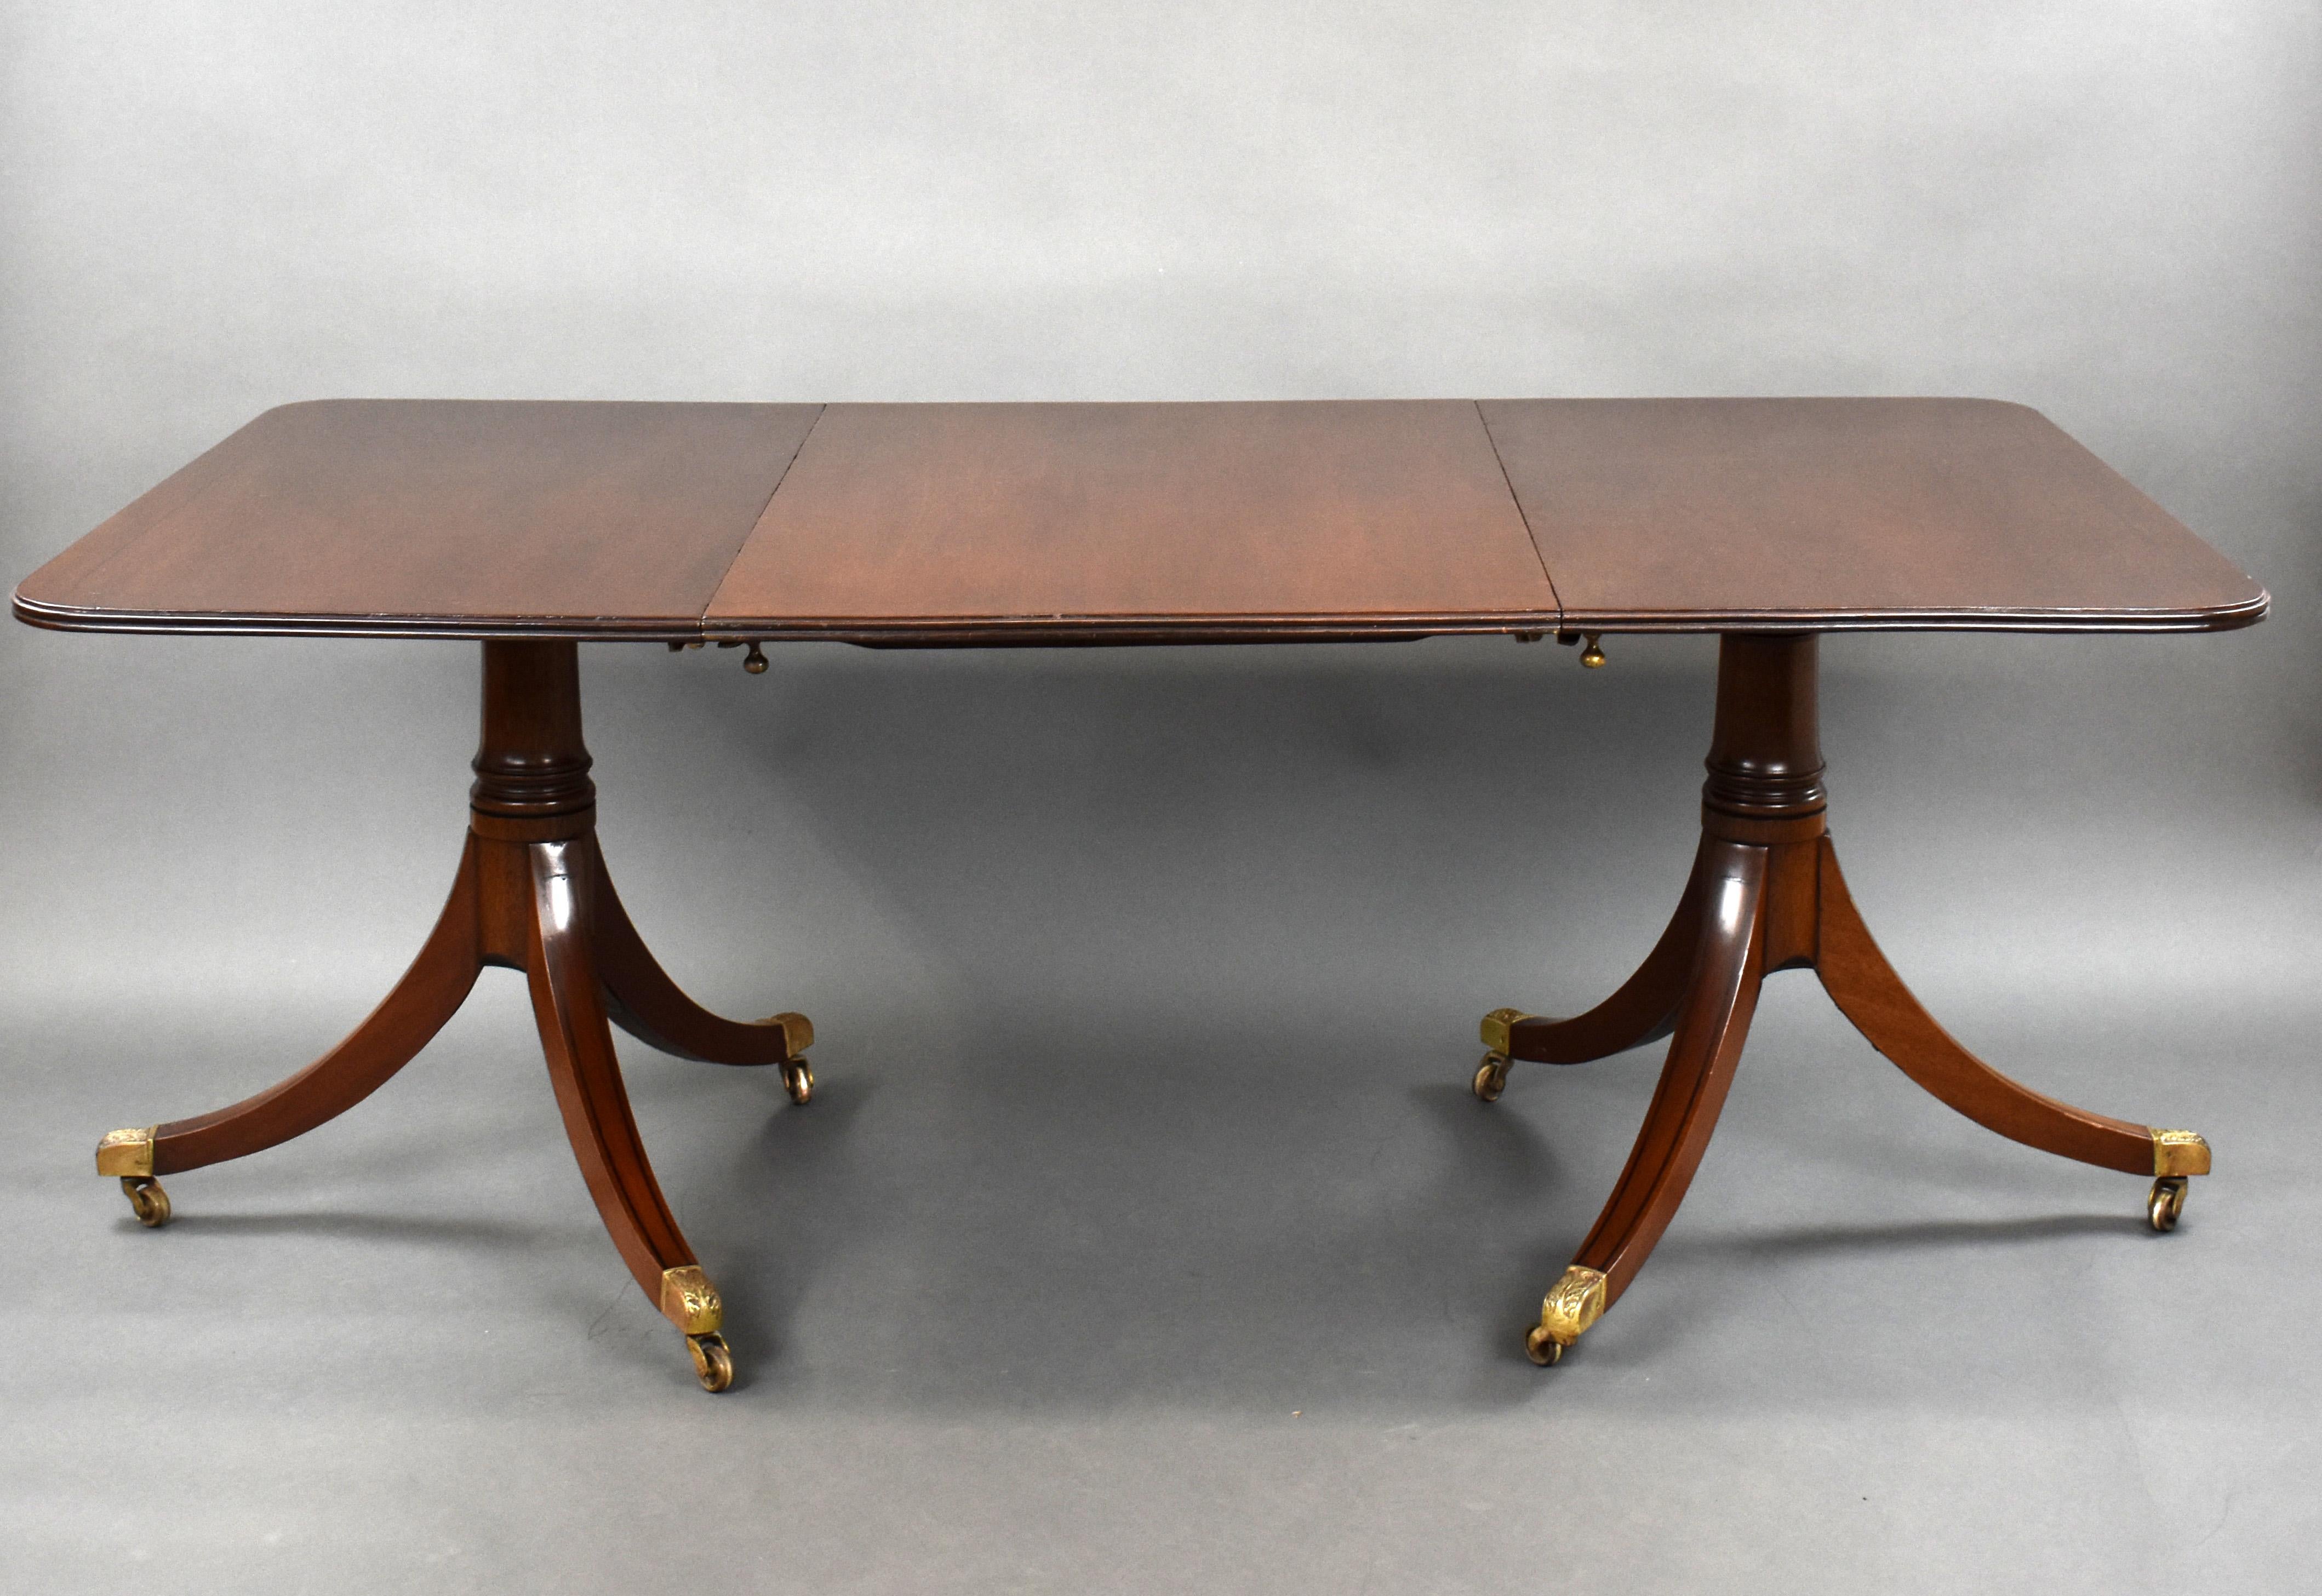 For sale is a good quality 19th century mahogany pedestal dining table. The top inlaid with black line having an additional leaf, above two pedestal bases with splayed legs, black line inlays terminating on brass castors. The table is in very good